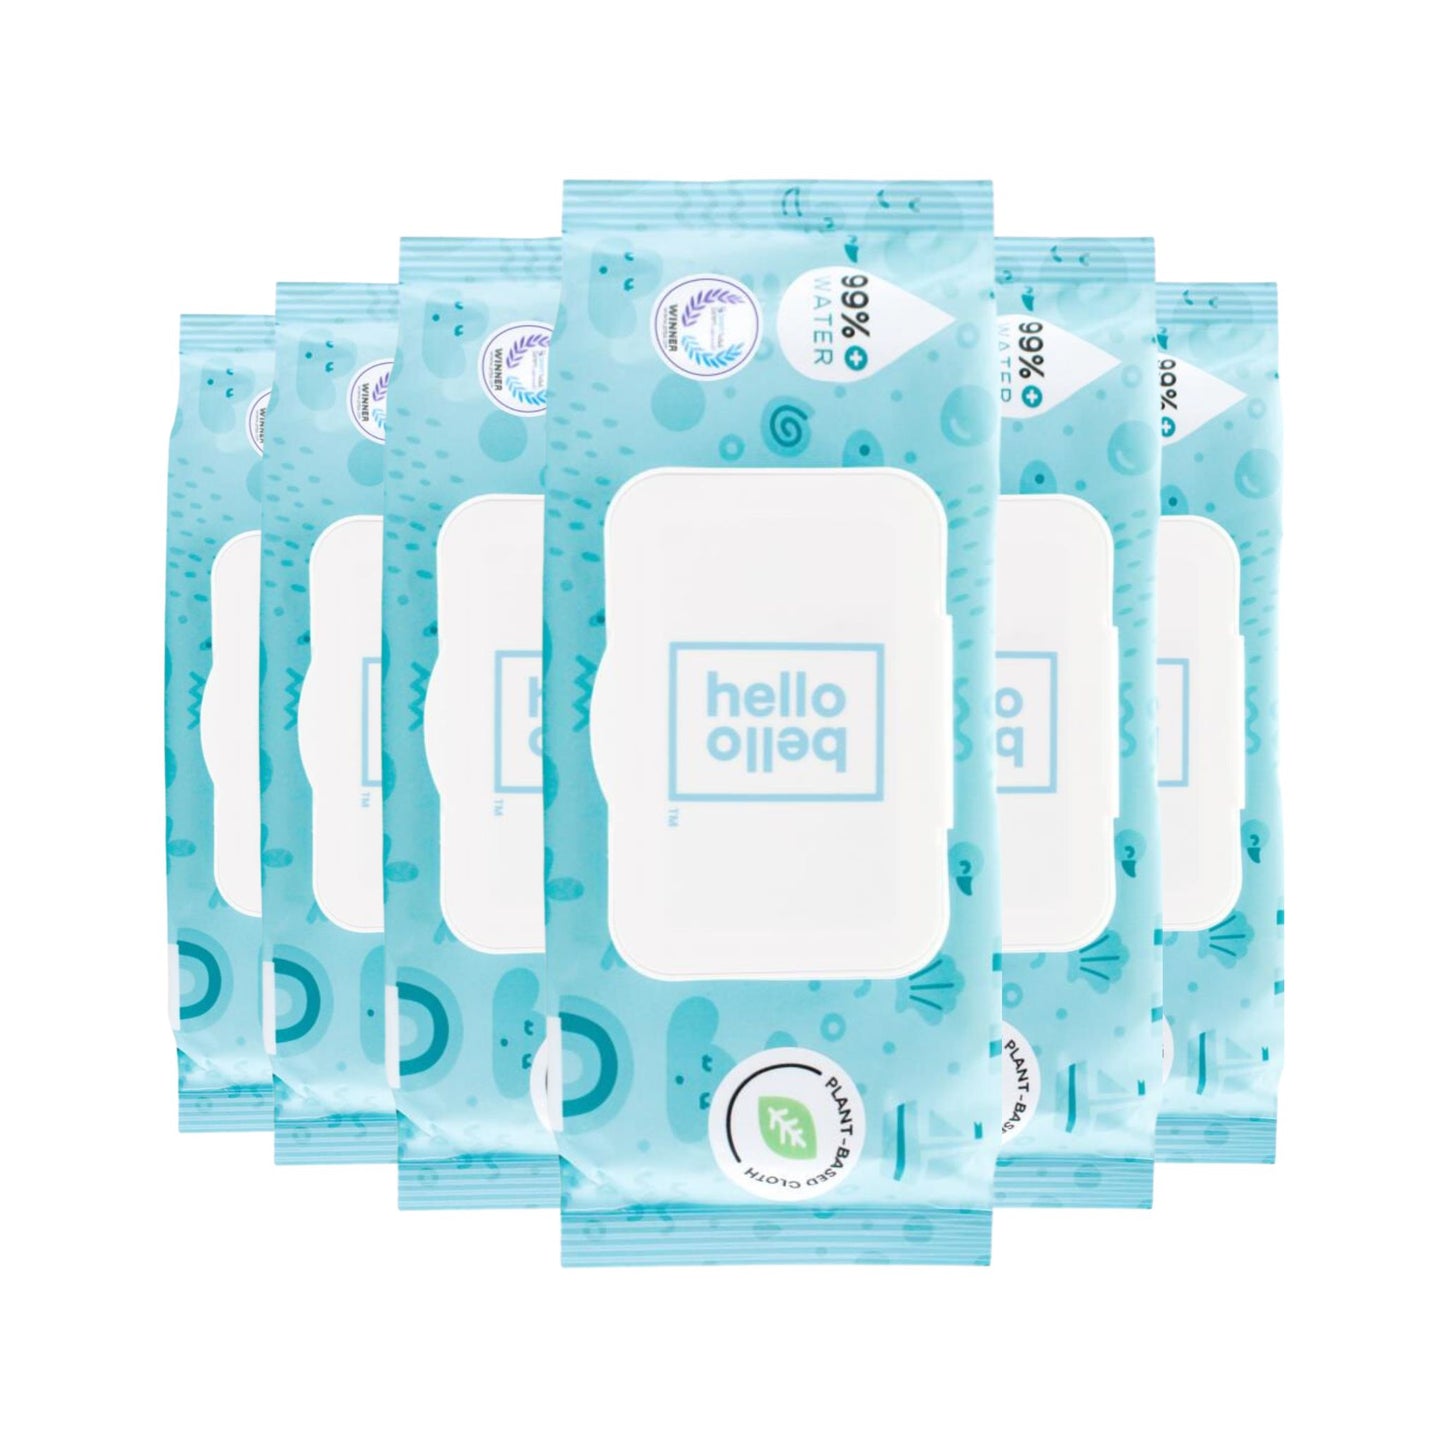 Pack of Hello Bello Premium Quality Baby Wipes with 99% Water, showing 360 wipes (6 x 60 packs) in eco-friendly packaging, highlighting its purity and gentleness for baby care.